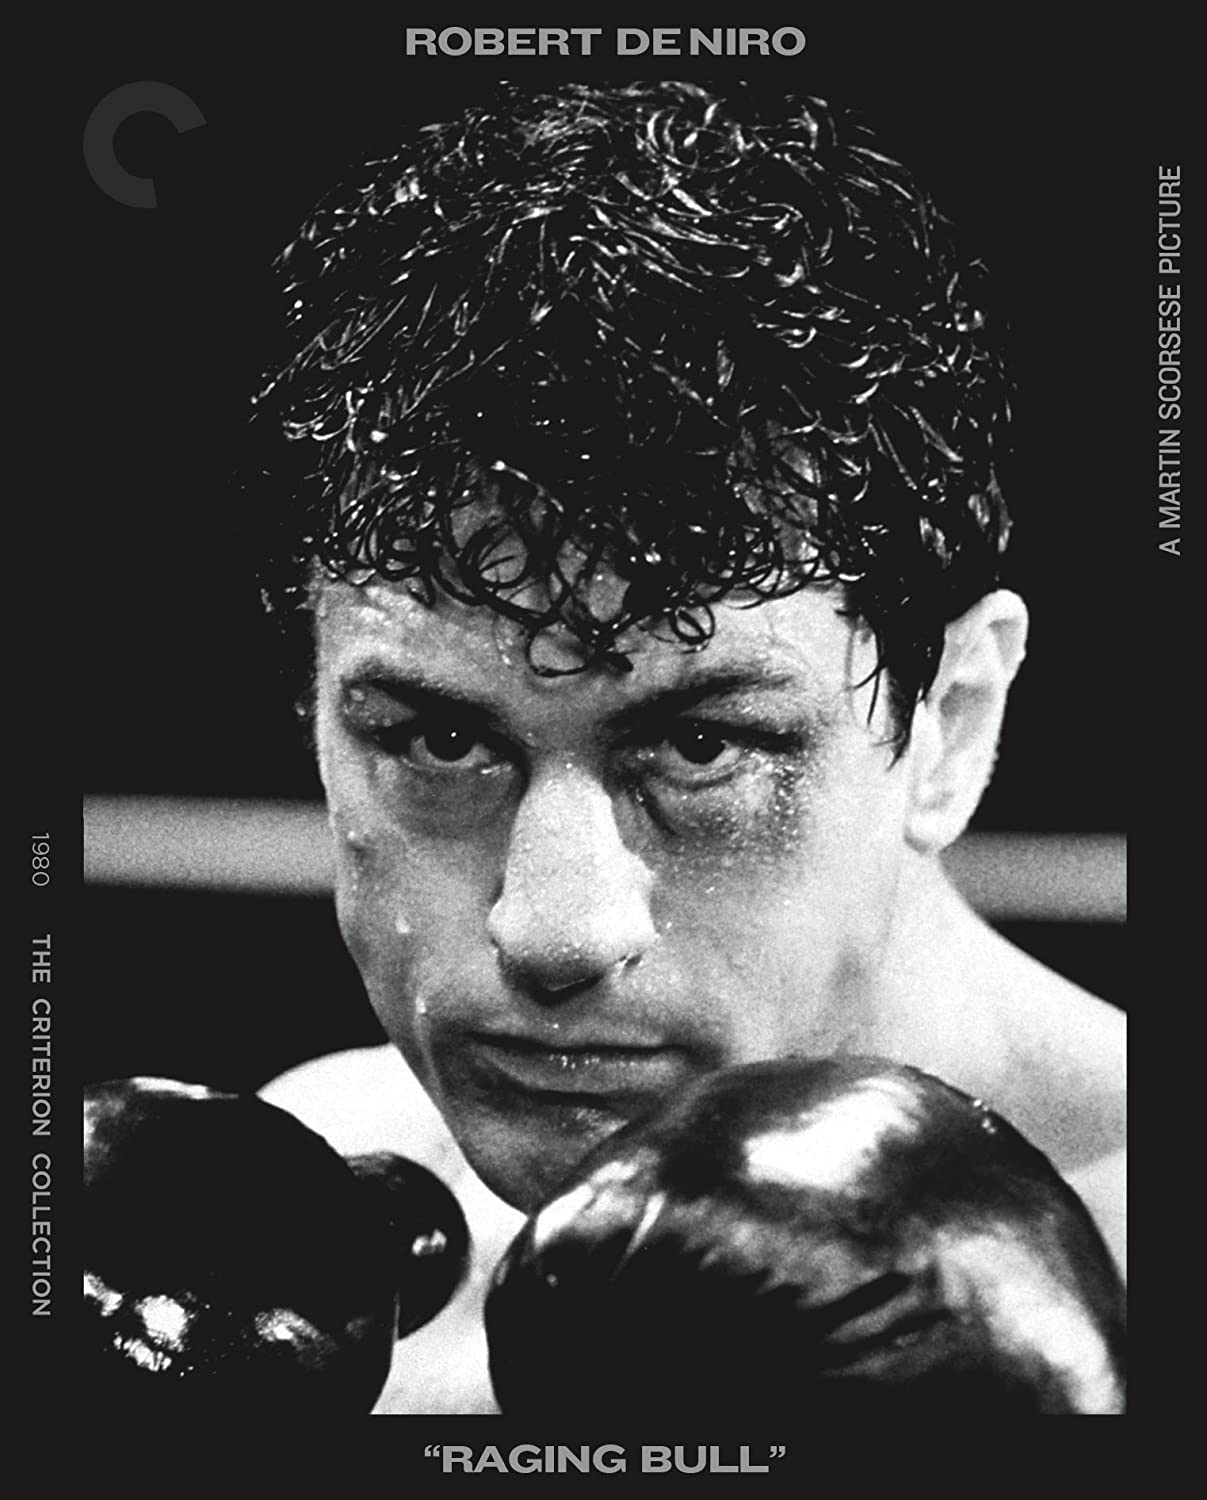 Raging Bull 4k Blu-ray Criterion Collection